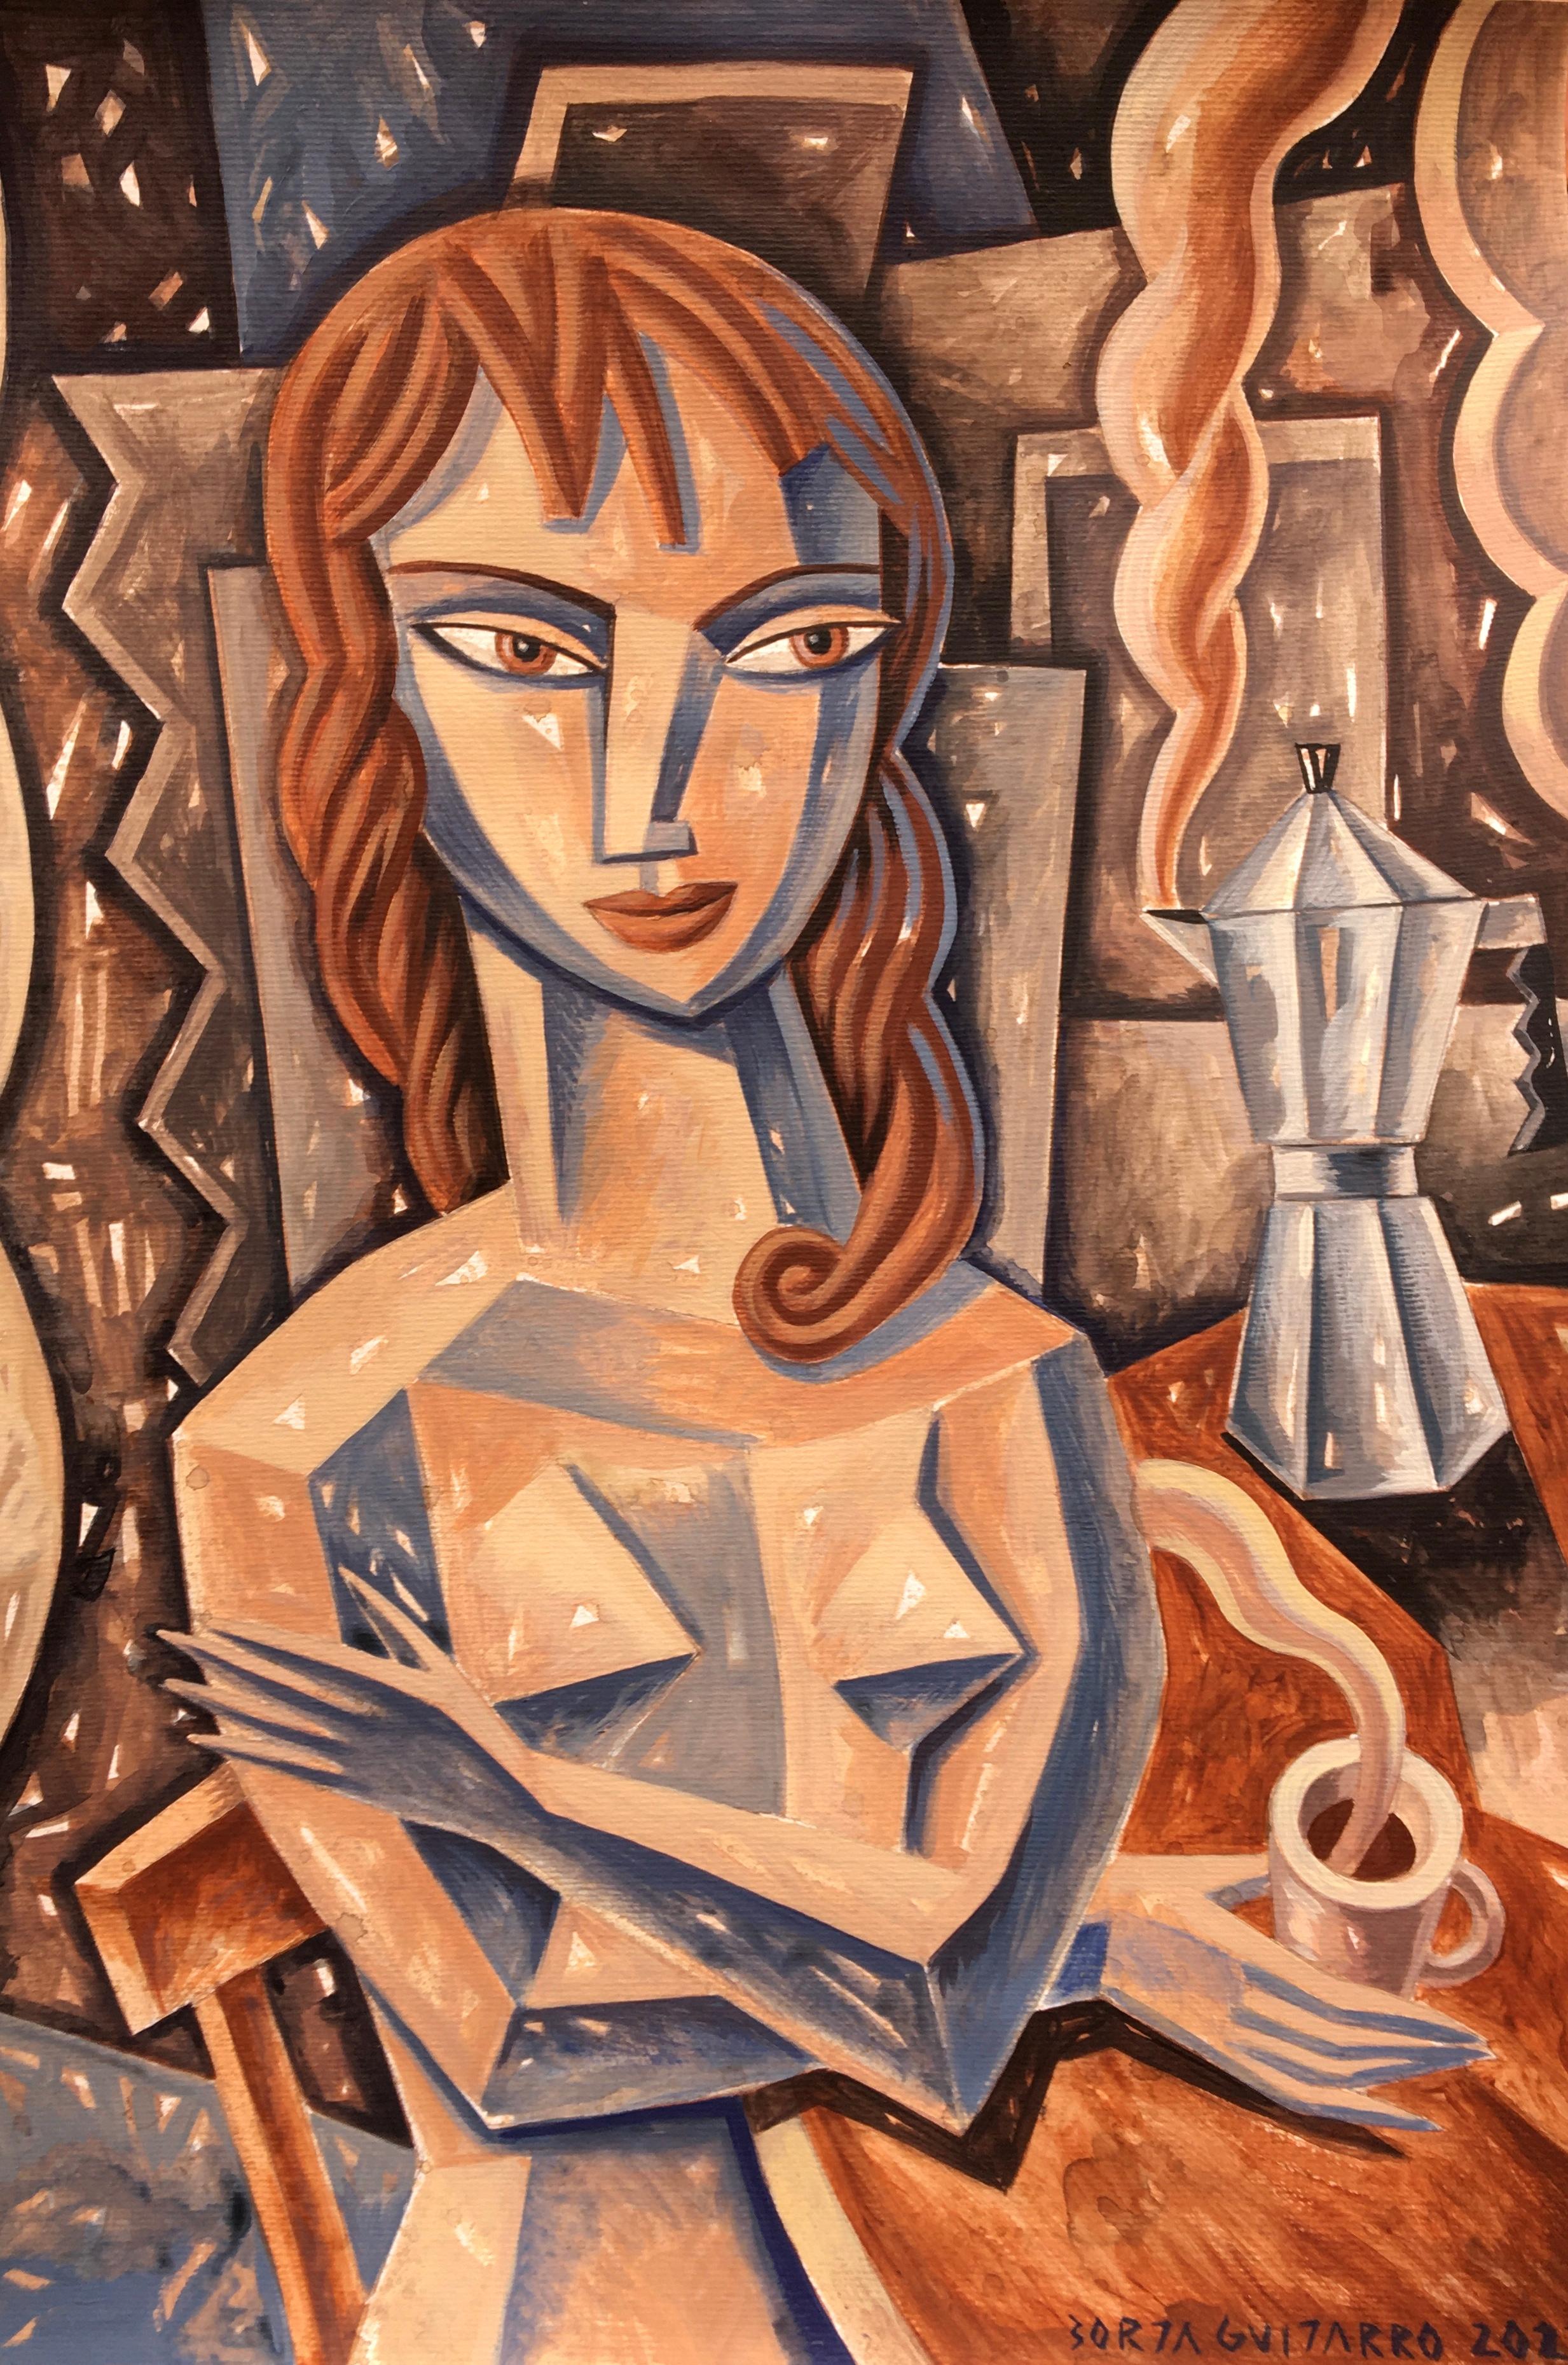 Mujer con Cafe - original portrait colourful still life painting cubism modern